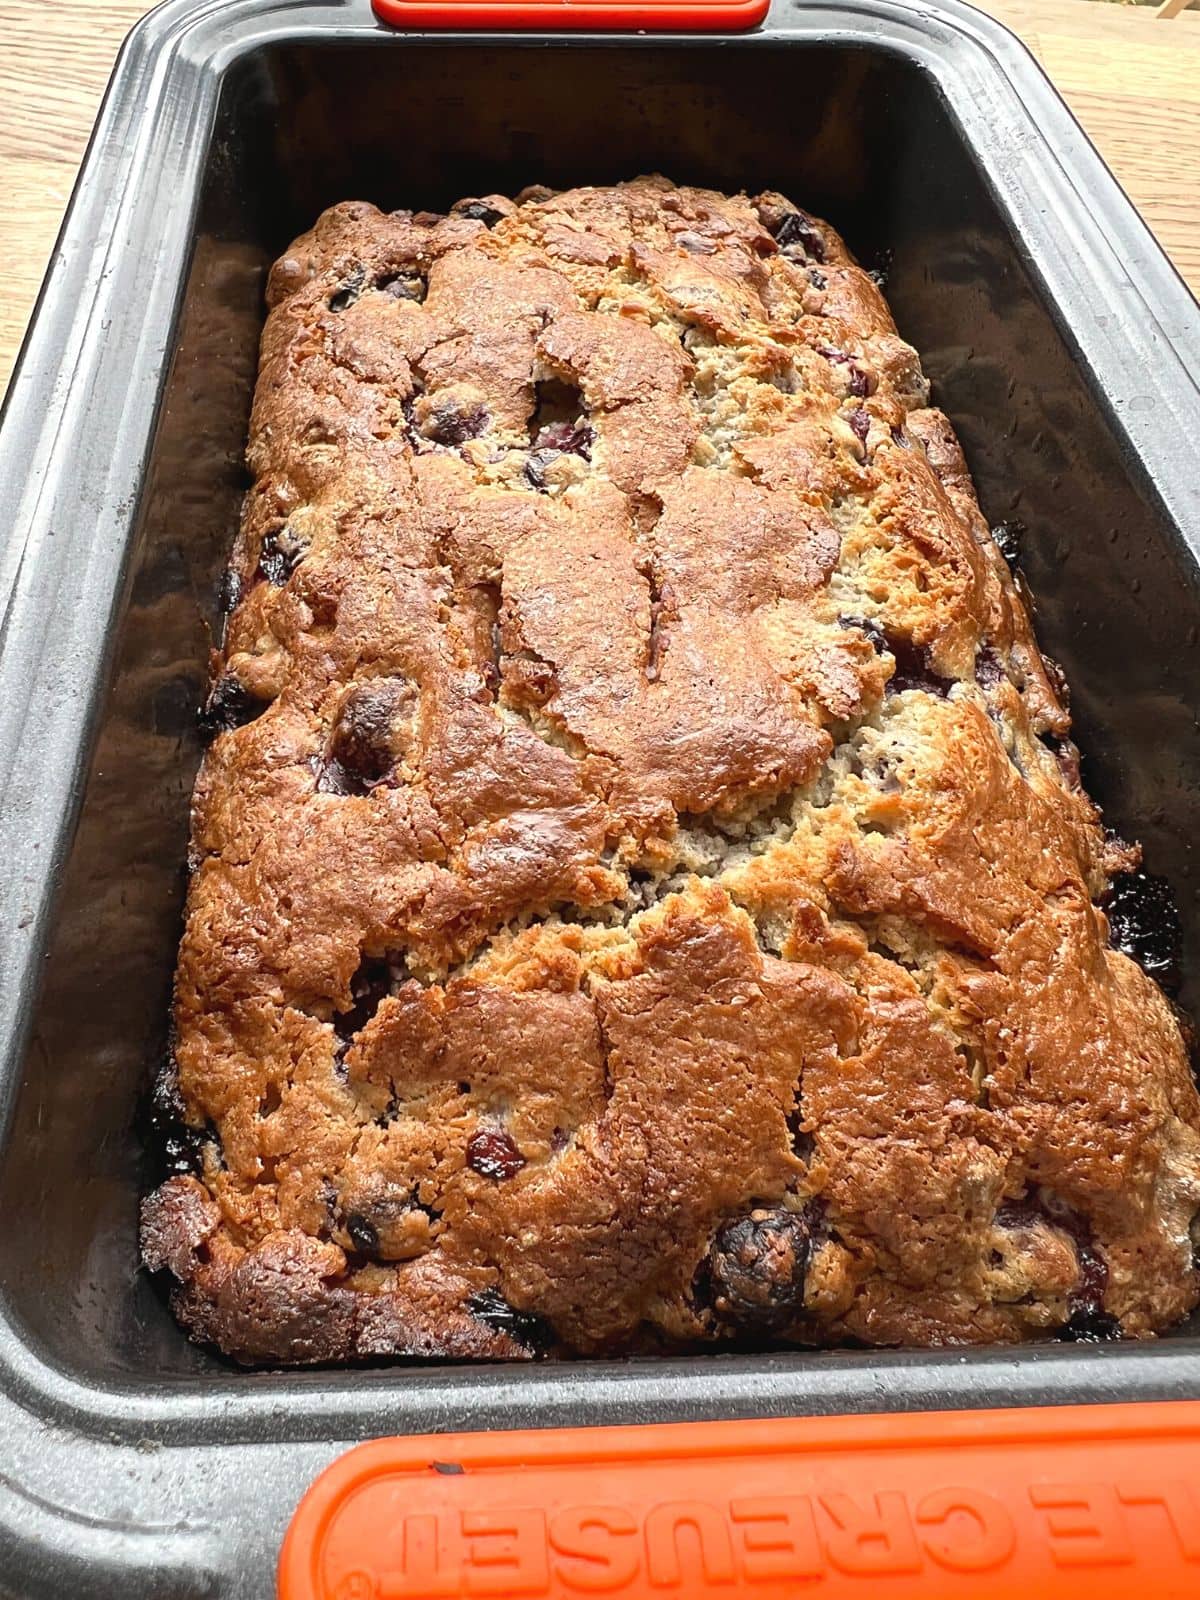 Baked blueberry bread in pan.